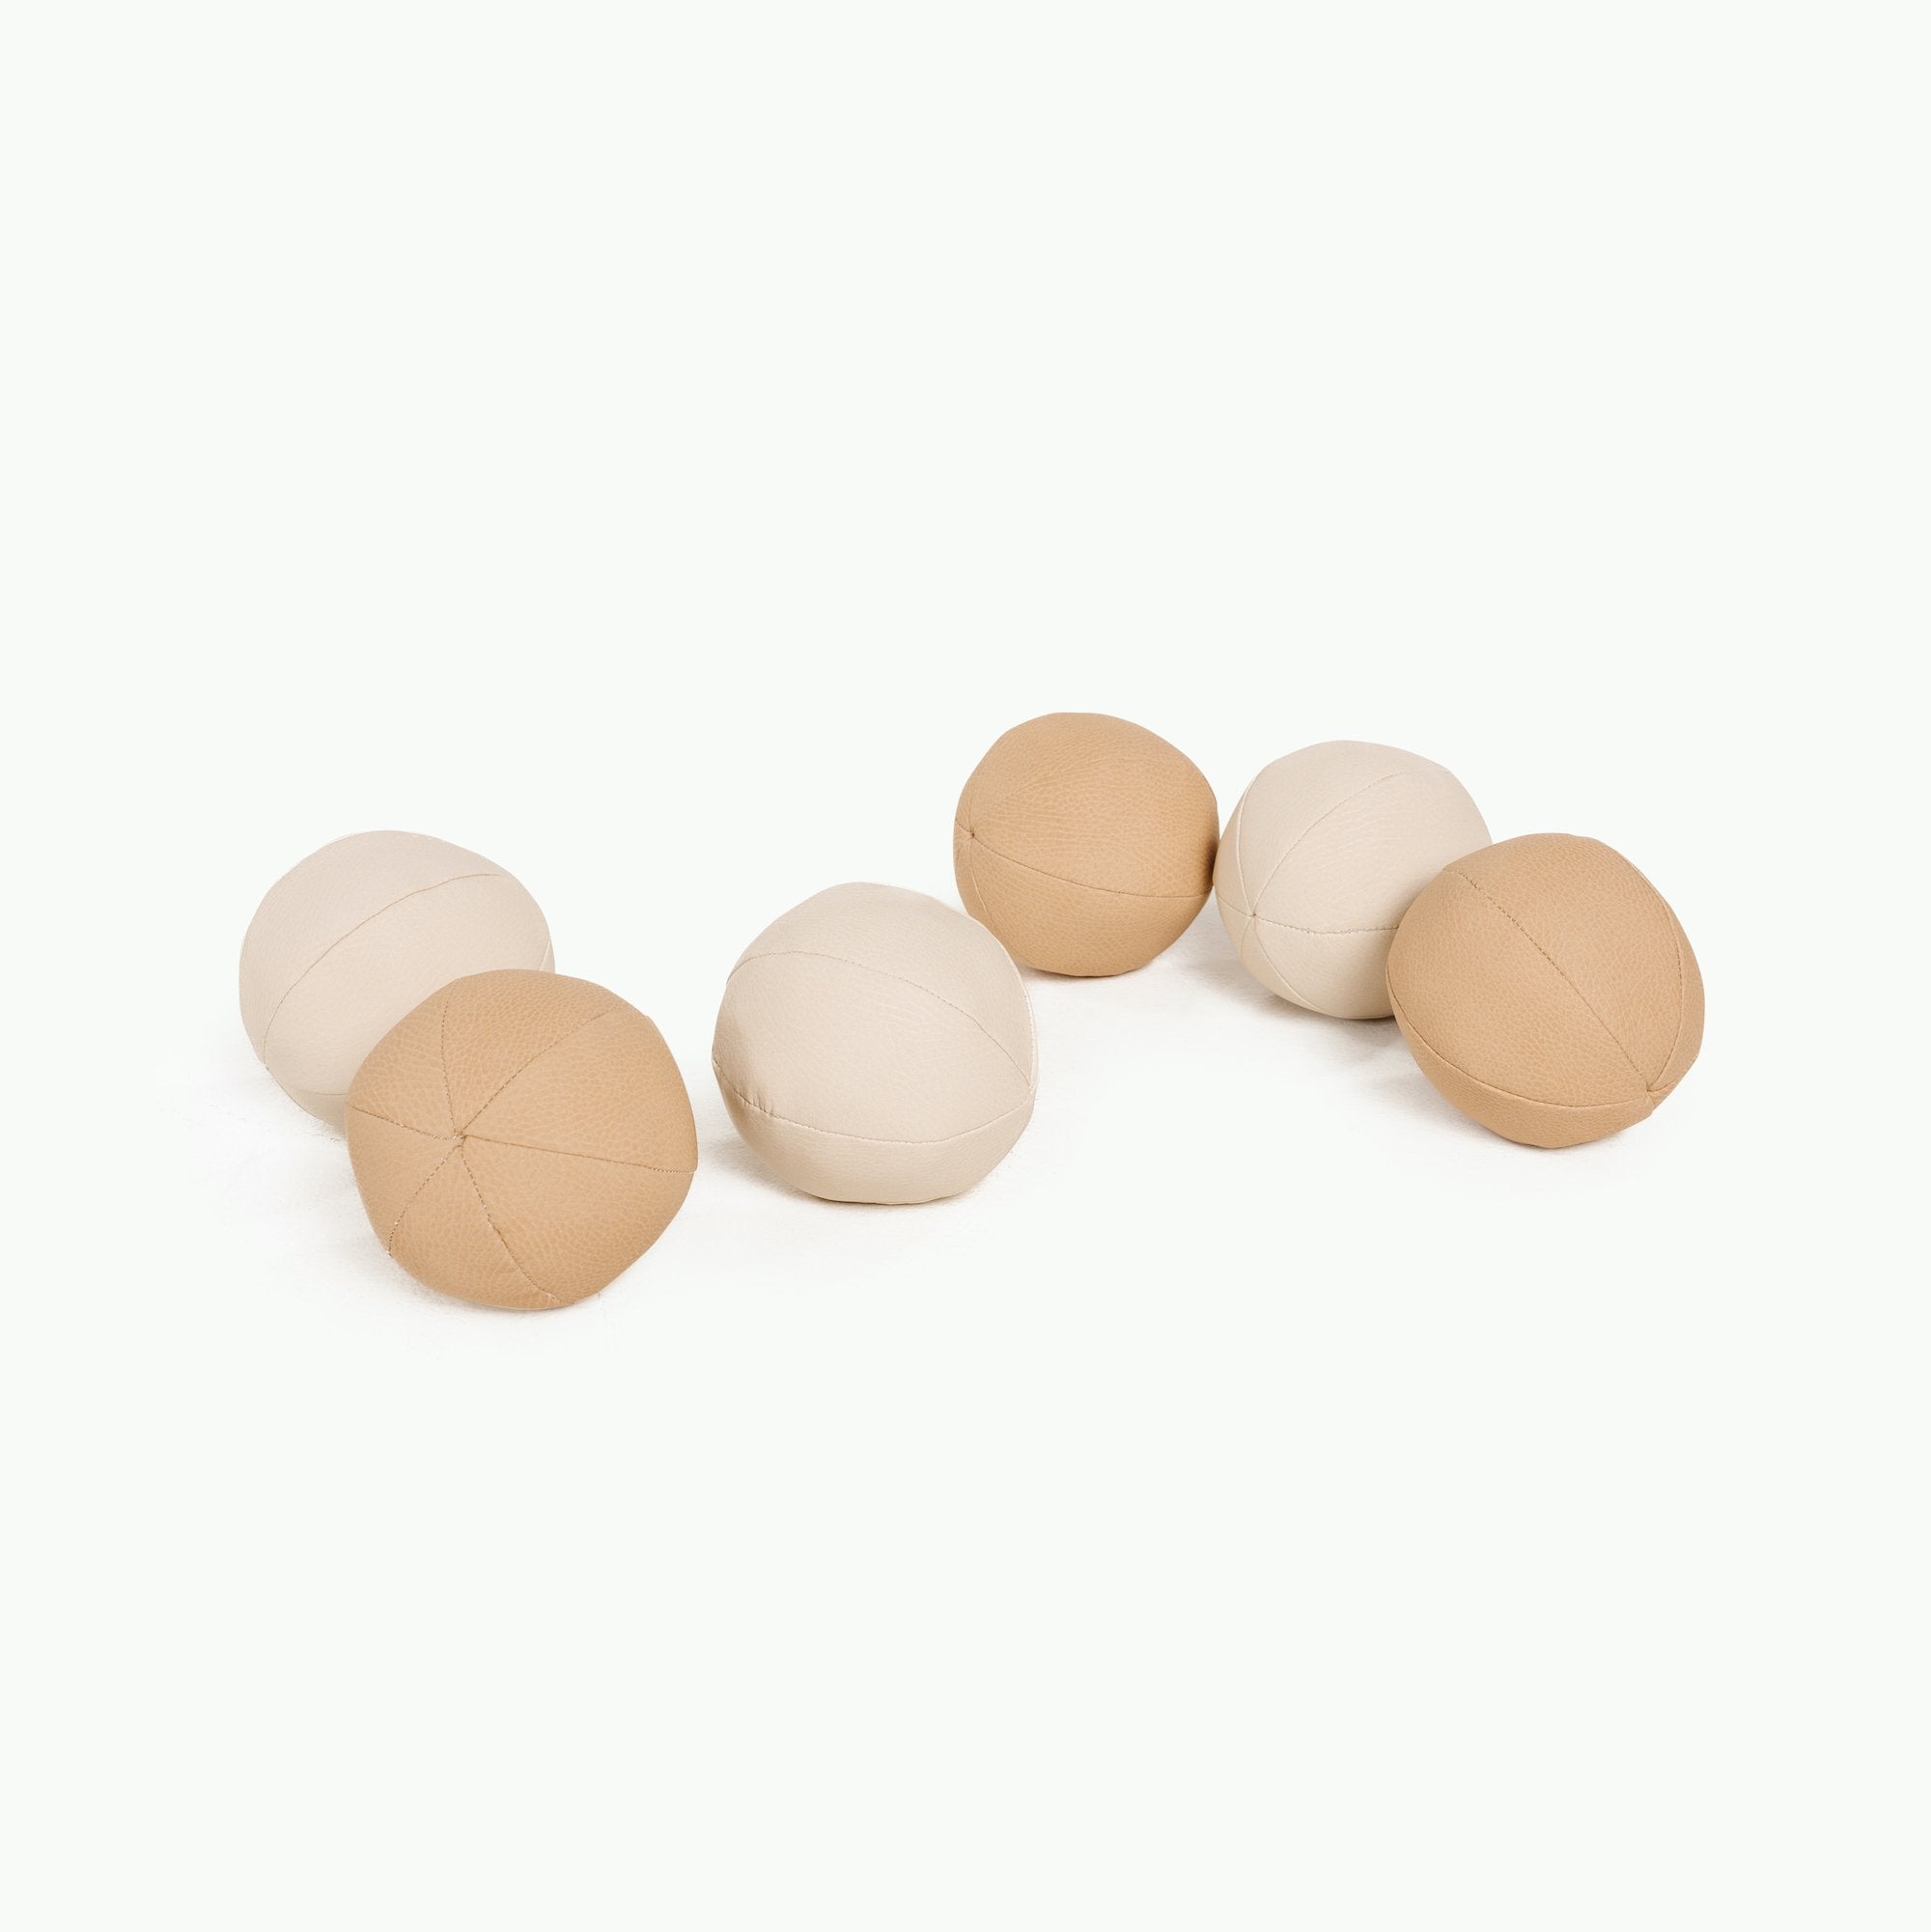 Untanned (on sale)@Untanned and Ivory Play Ball Sets